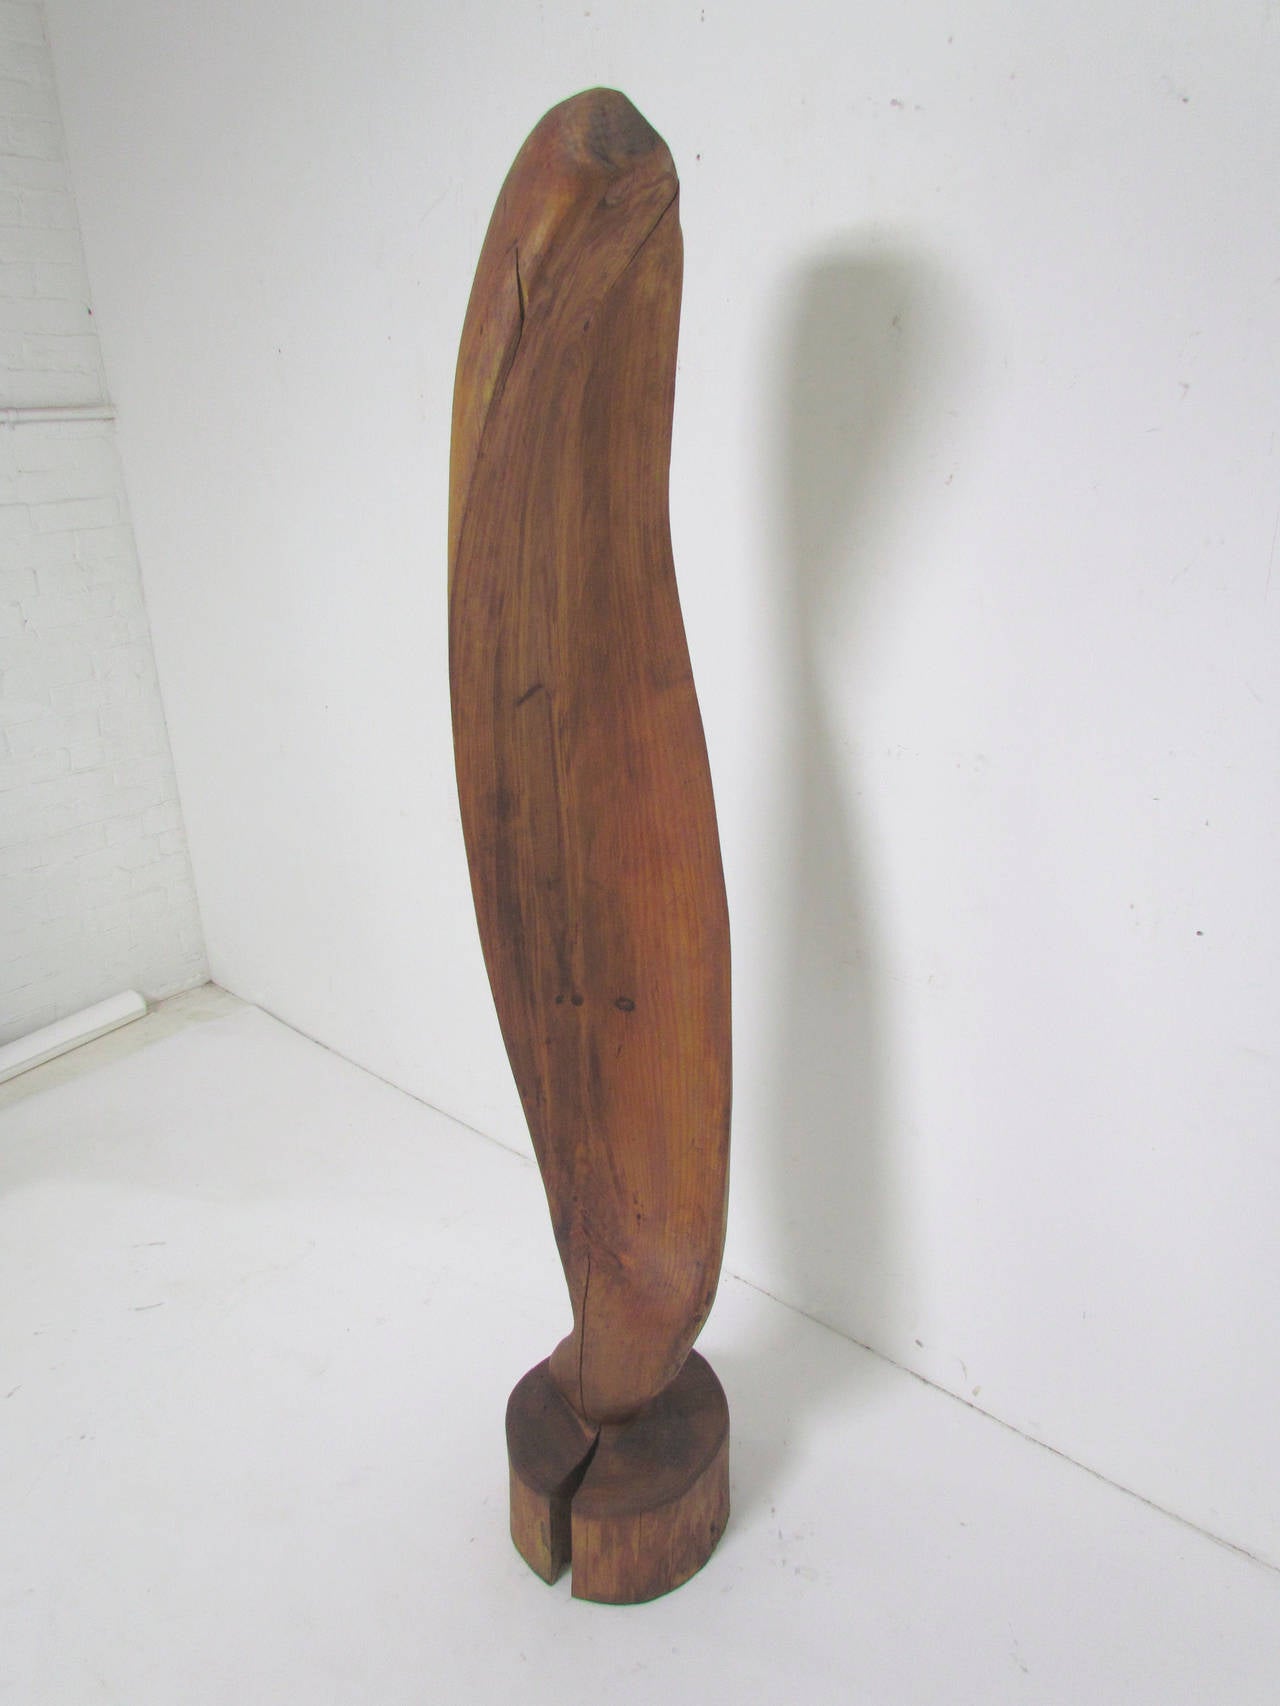 American Abstract Hand-Carved Wood Five Foot Floor Sculpture by F. Neal Eddy, Dated 1979